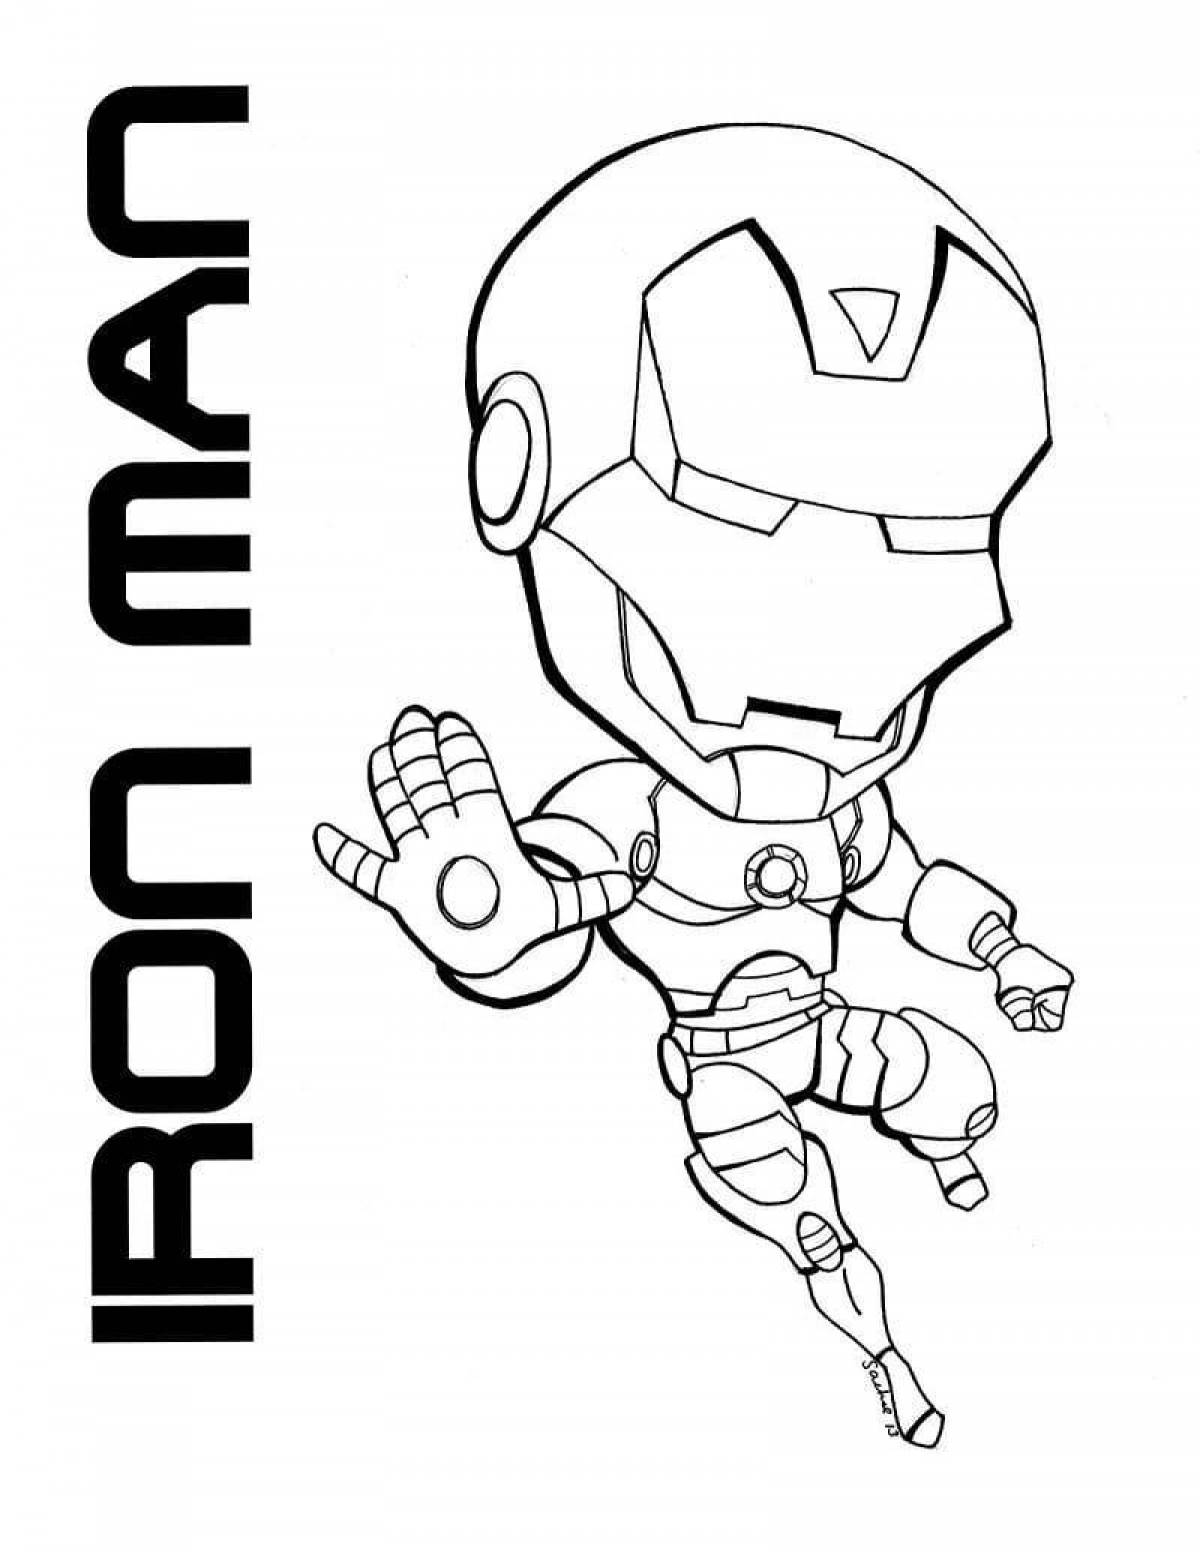 Great iron man coloring book for kids